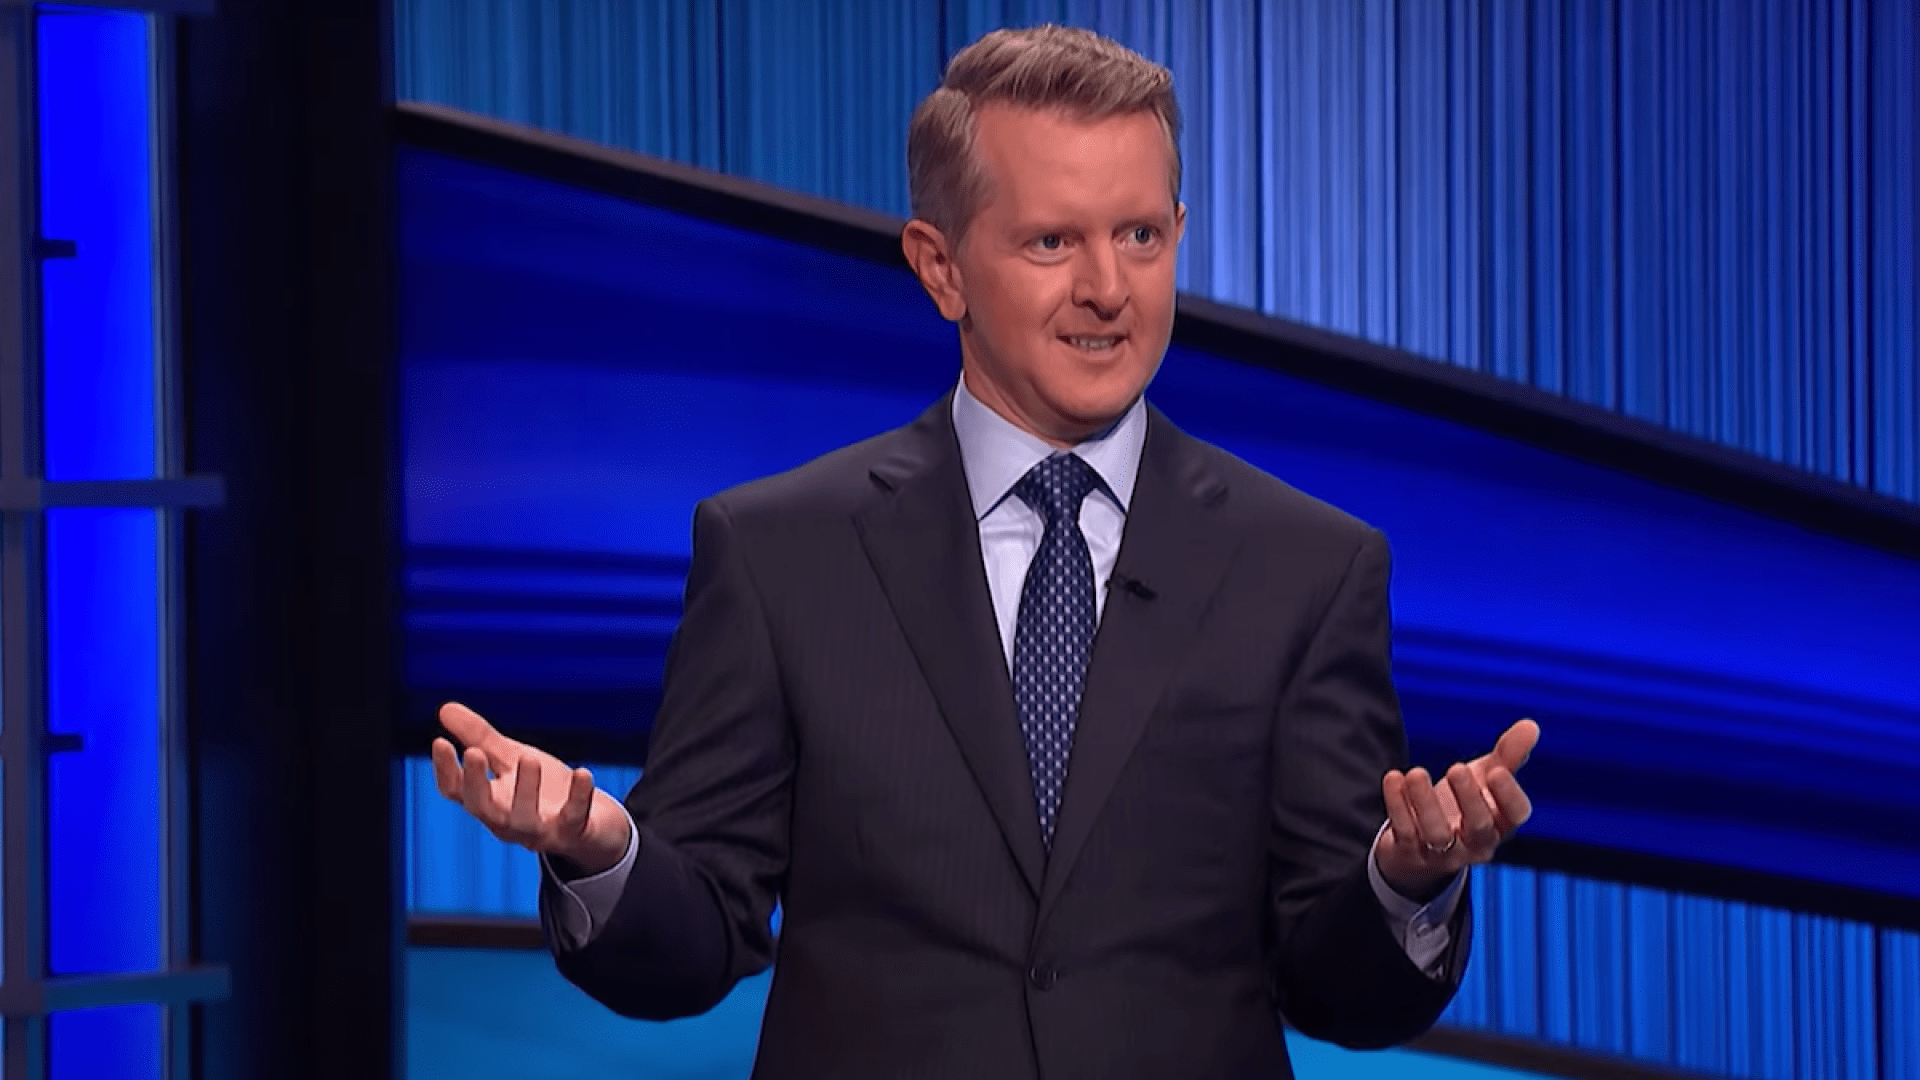 This Ken Jennings Jeopardy Ruling Has Fans Furious